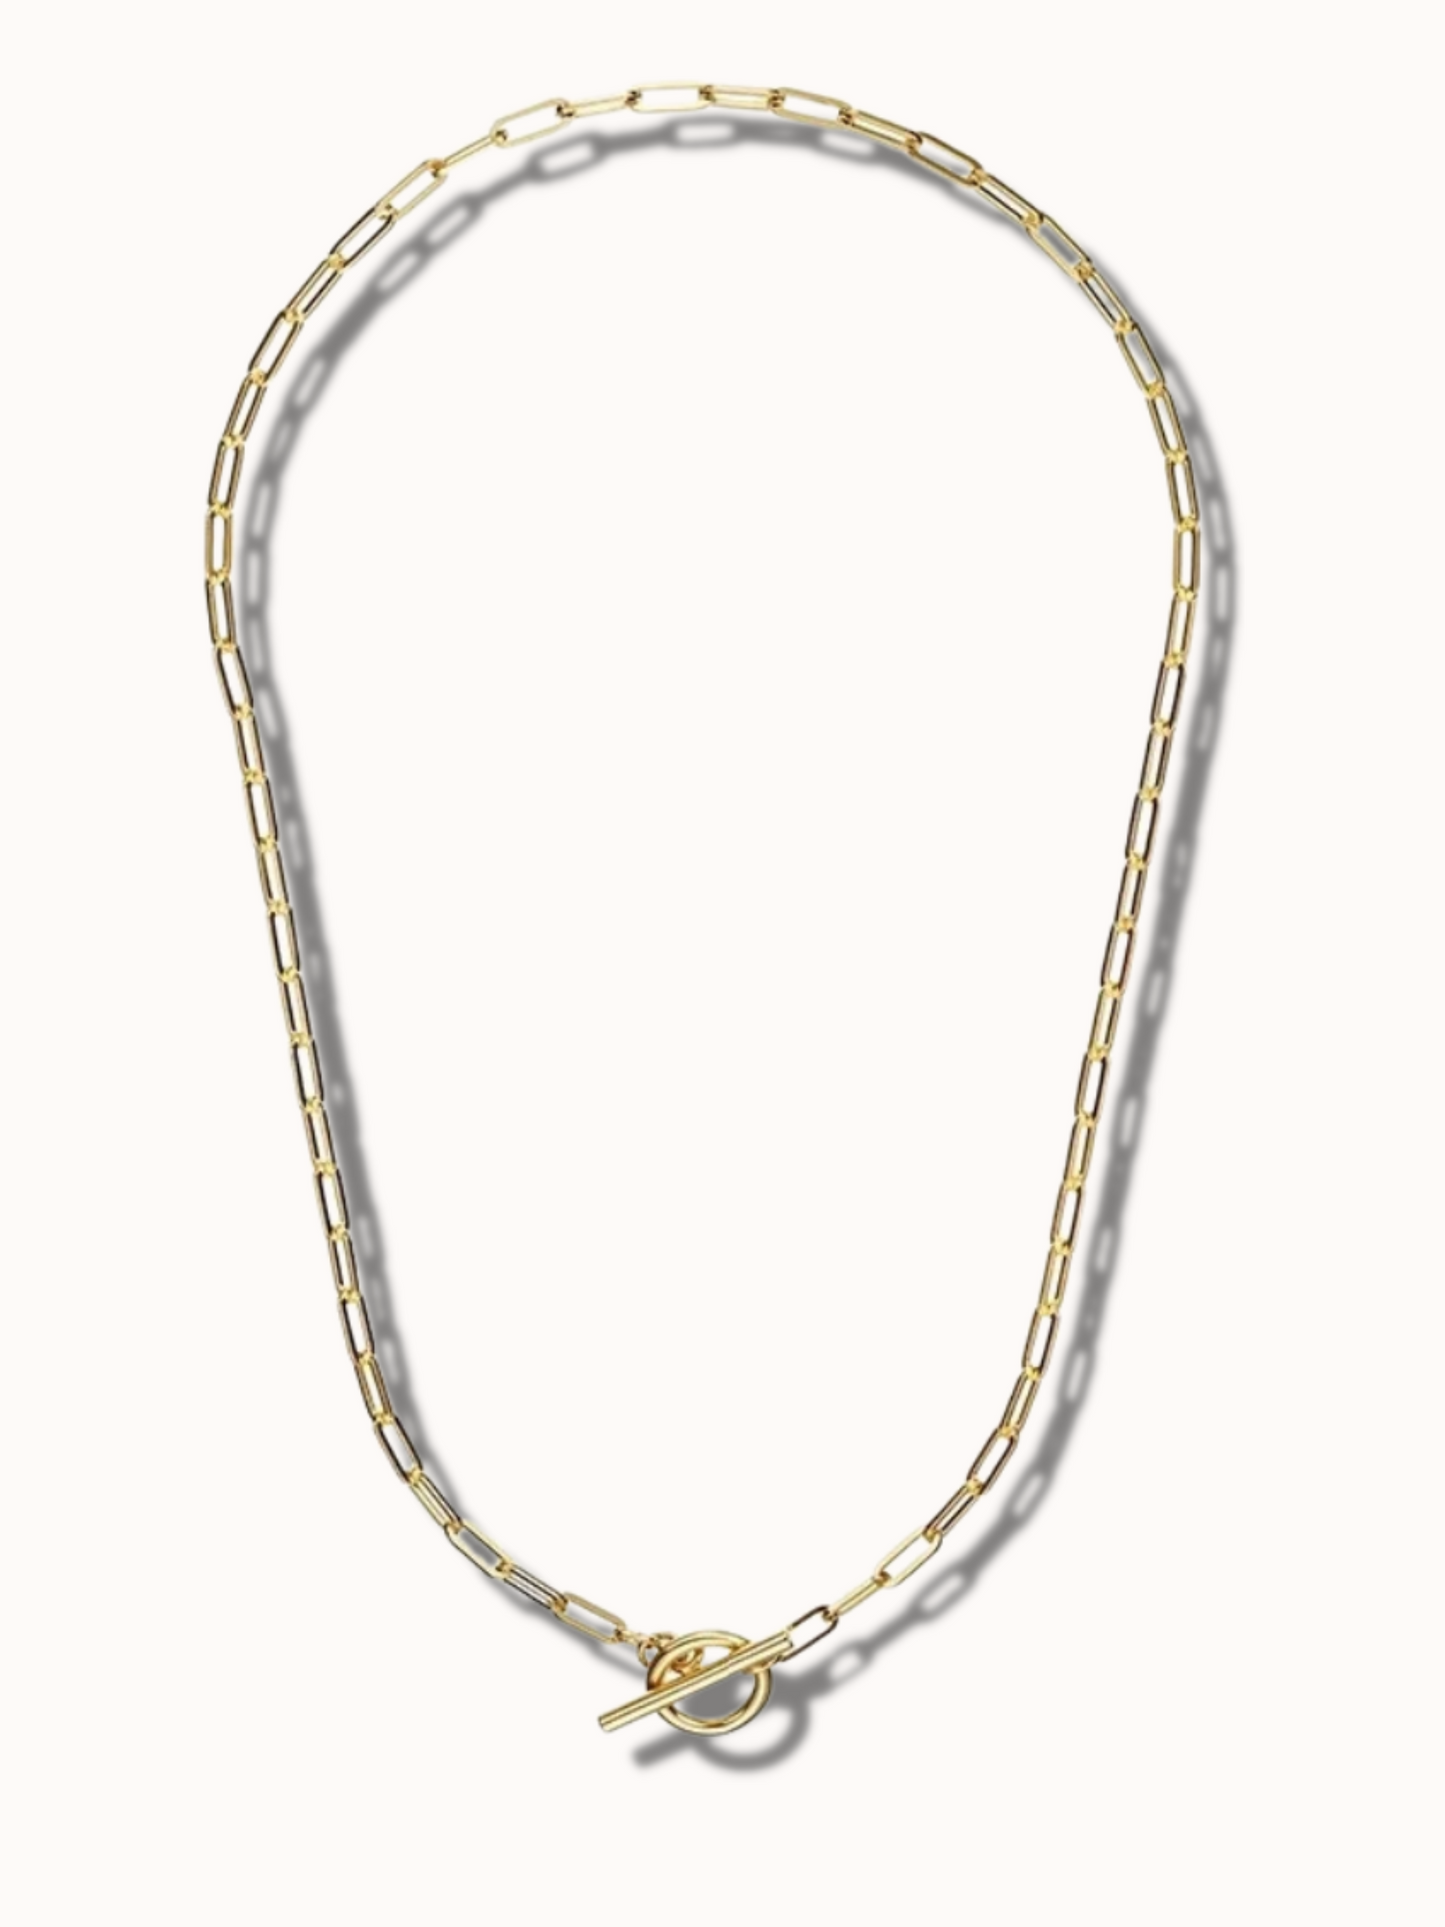 T-Bar Necklace - Paper Clip 18k Gold Plated Stainless Steel Necklace | Love Tezza